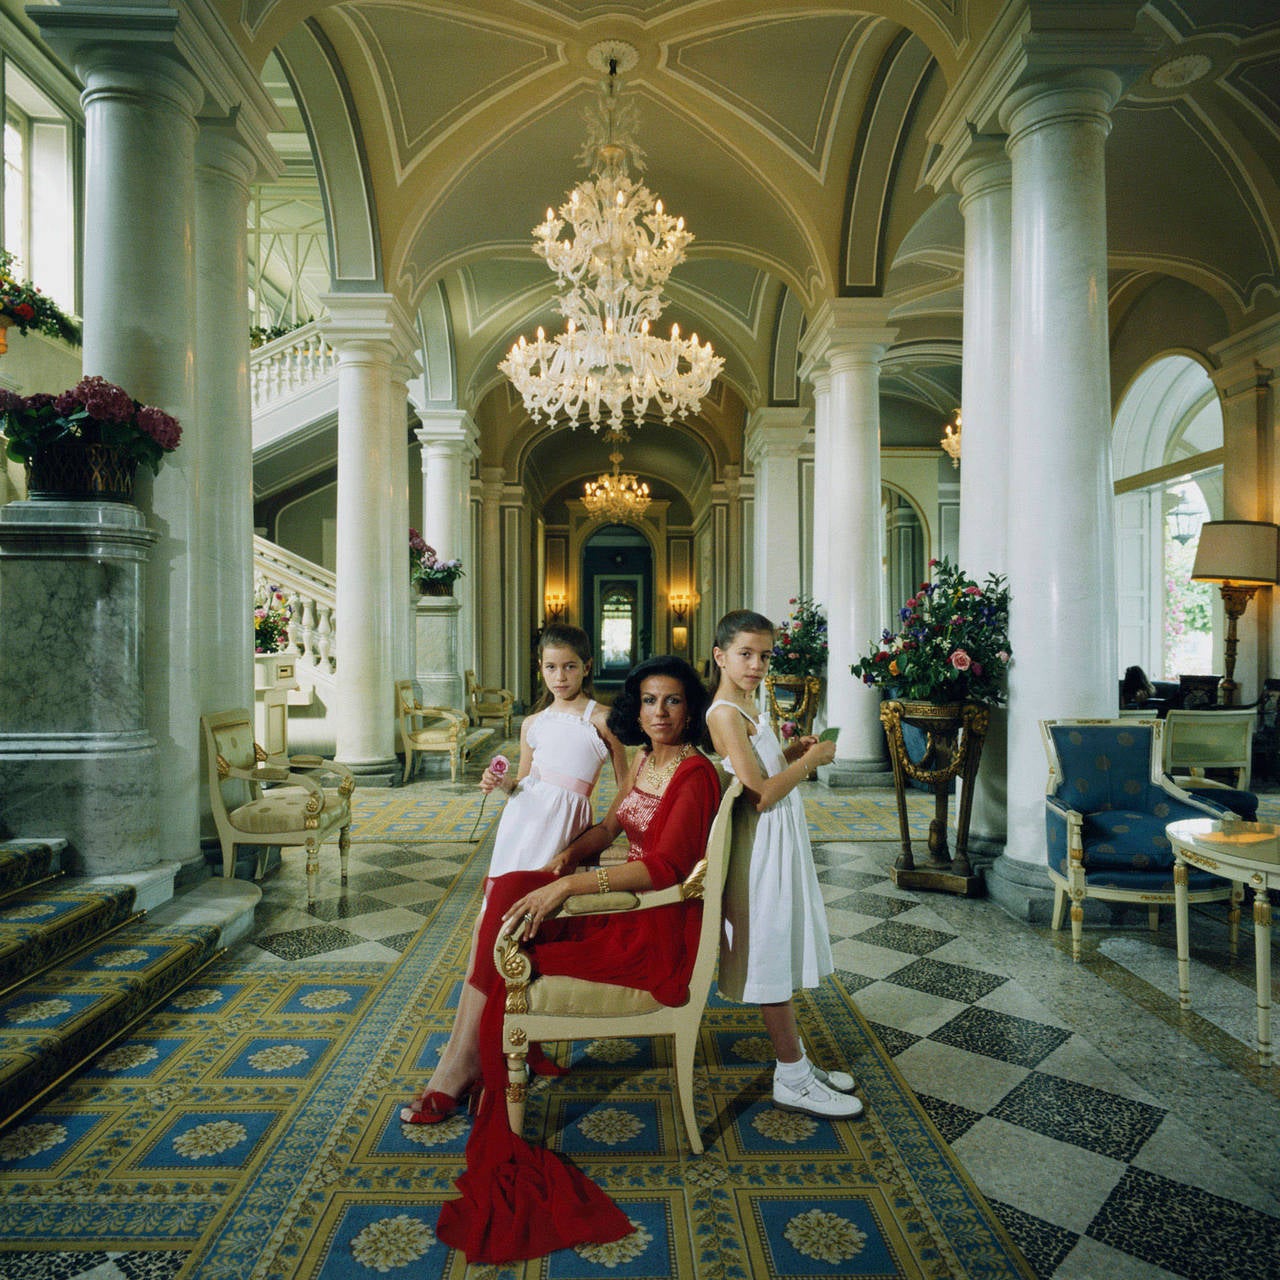 Slim Aarons Figurative Photograph - Droulers And Daughters (Estate Edition)